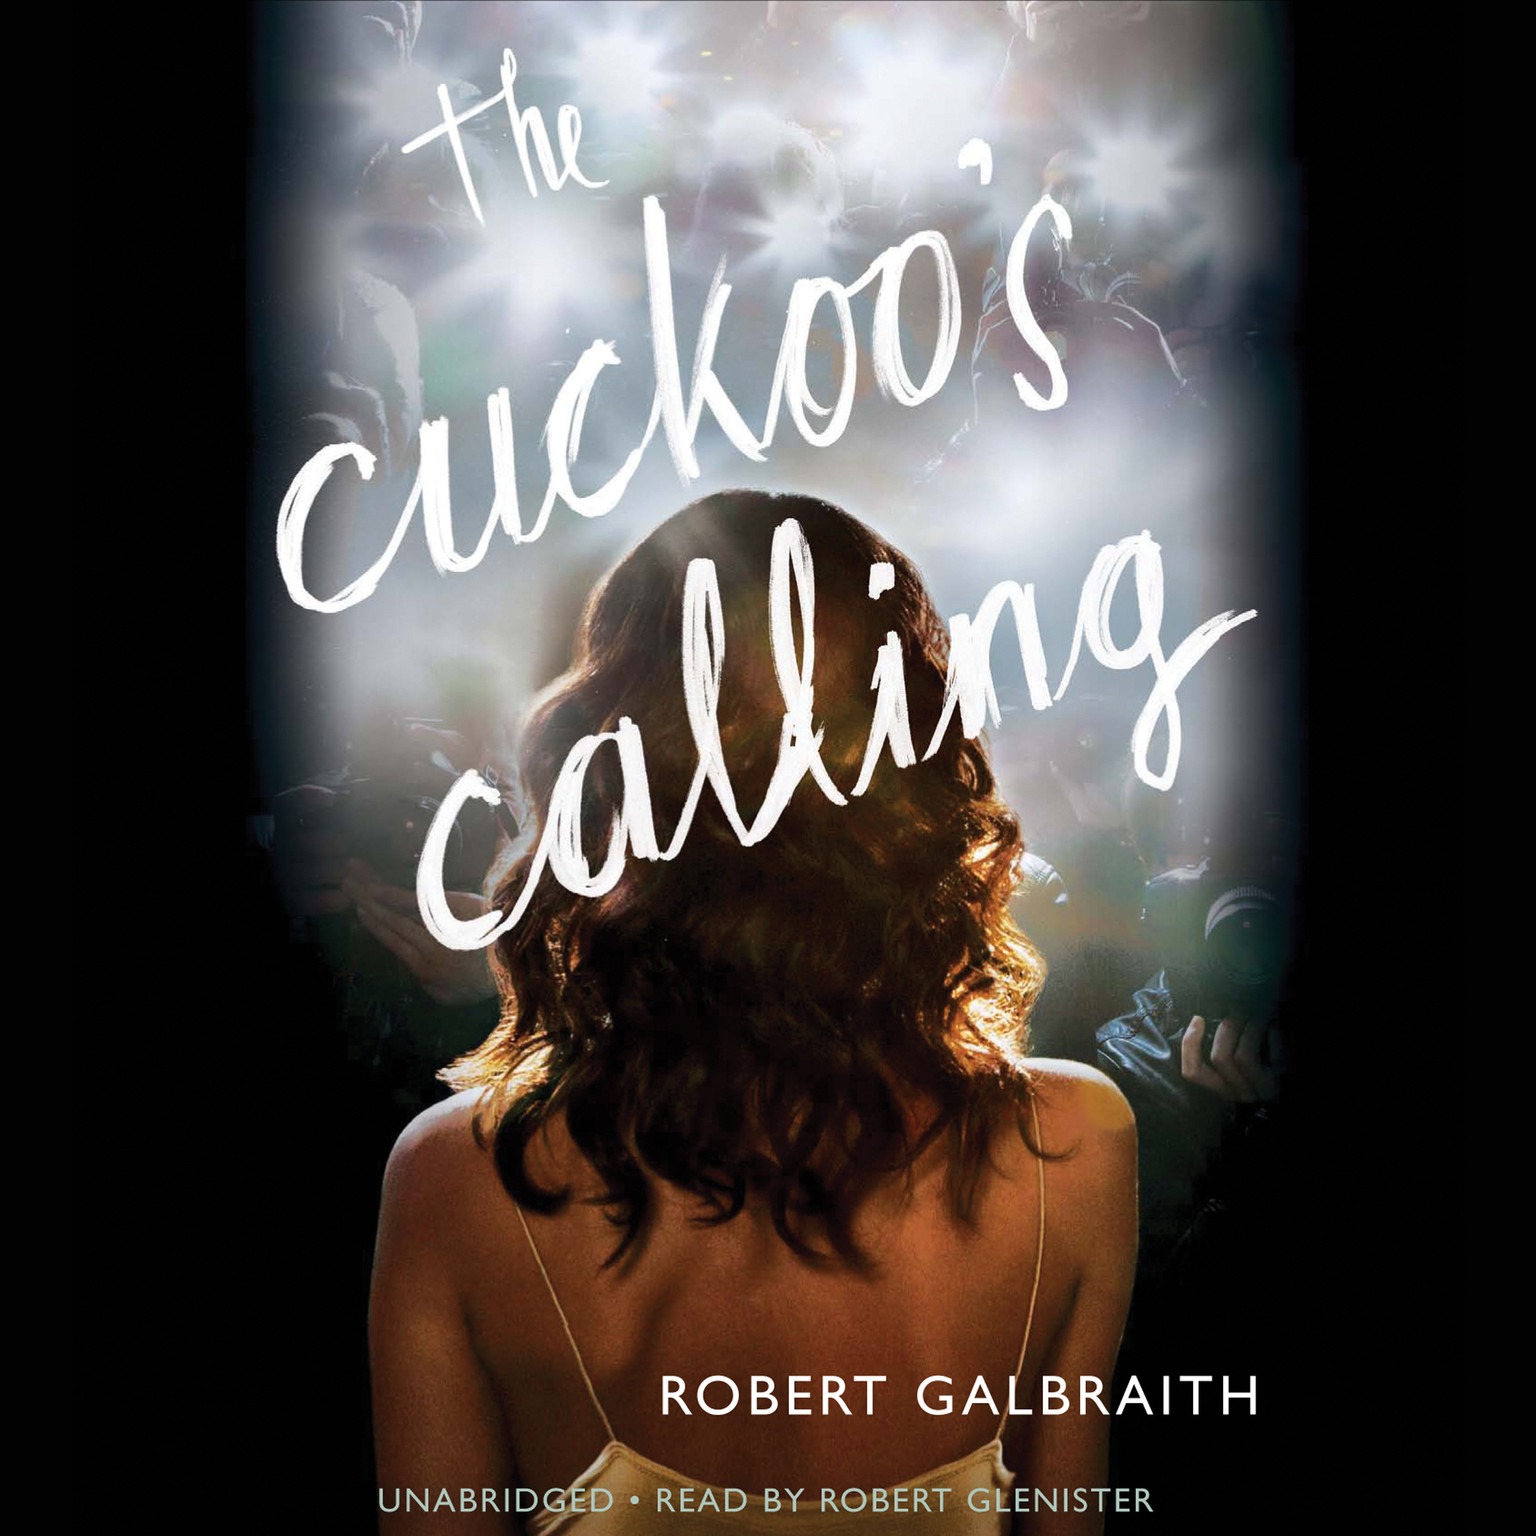 Cover image for Robert Galbraith's 'The Cuckoo's Calling'